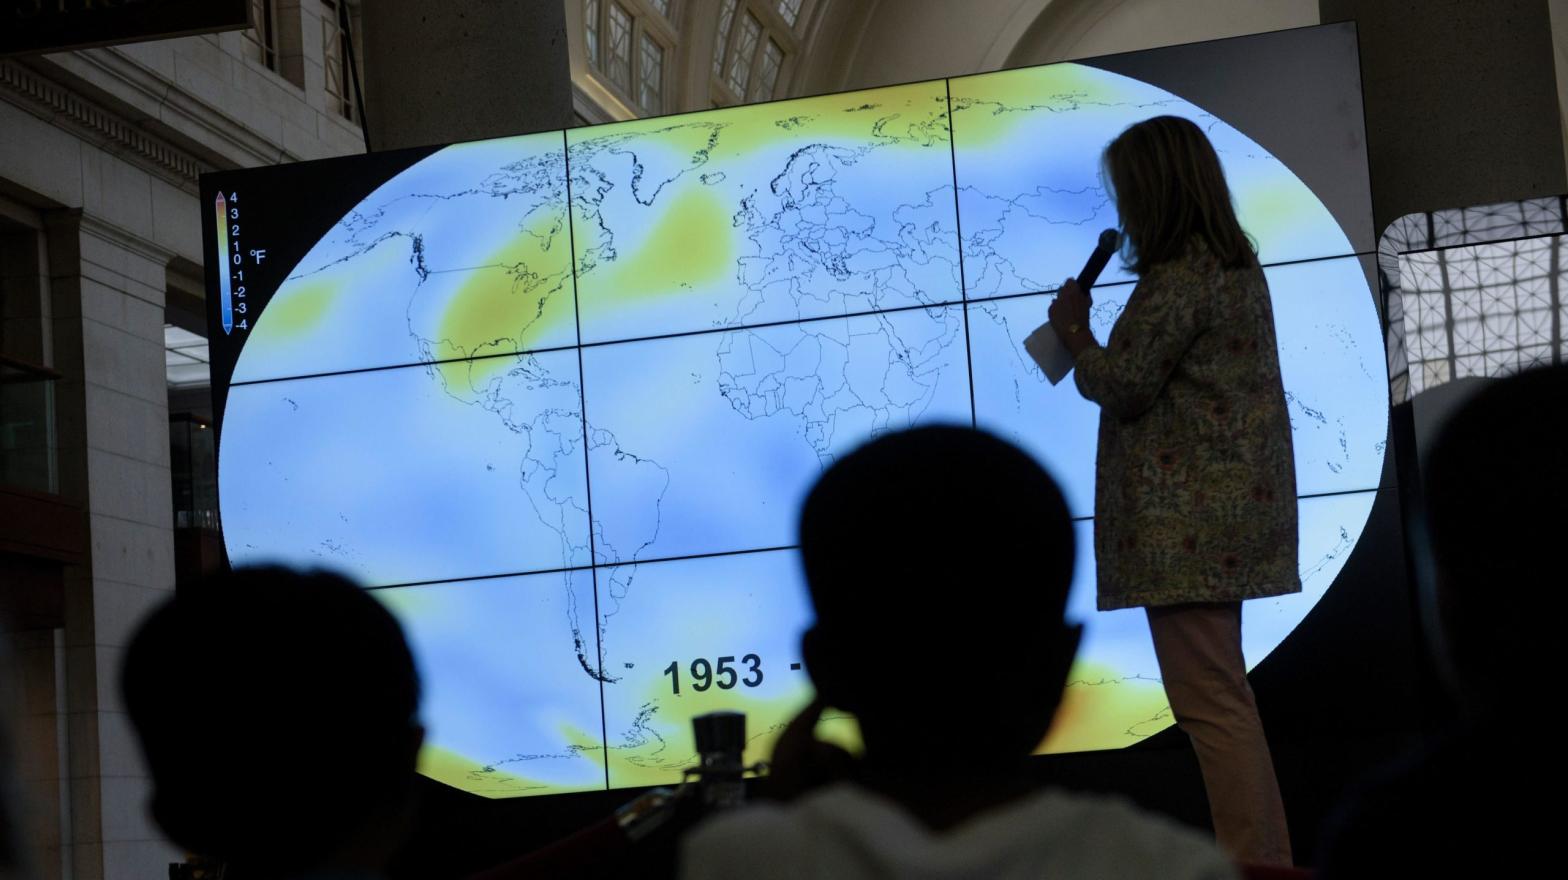 Students watch a presentation at an event sponsored by NASA to celebrate Earth Day on April 22, 2016, in Washington, DC. (Photo: Brendan Smialowski / AFP, Getty Images)